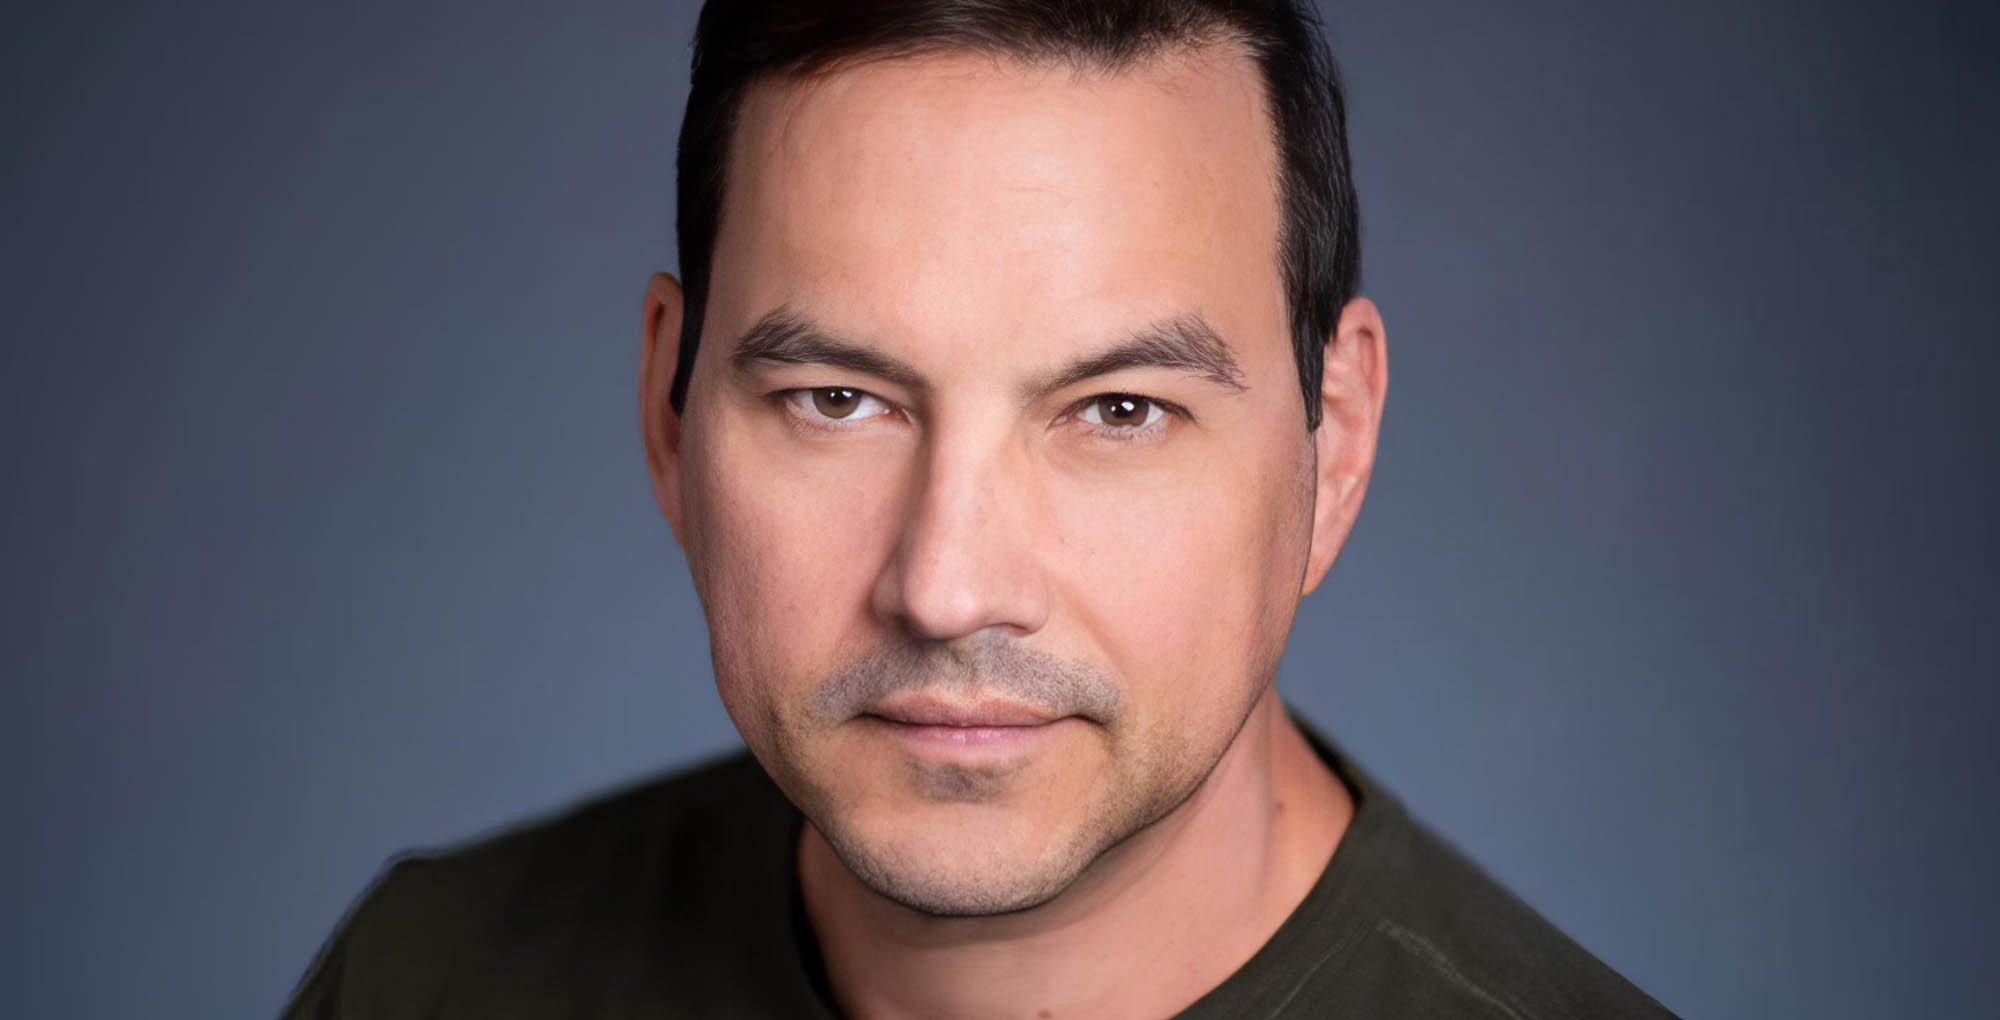 days of our lives and general hospital alum tyler christopher is remembered by his best friend.